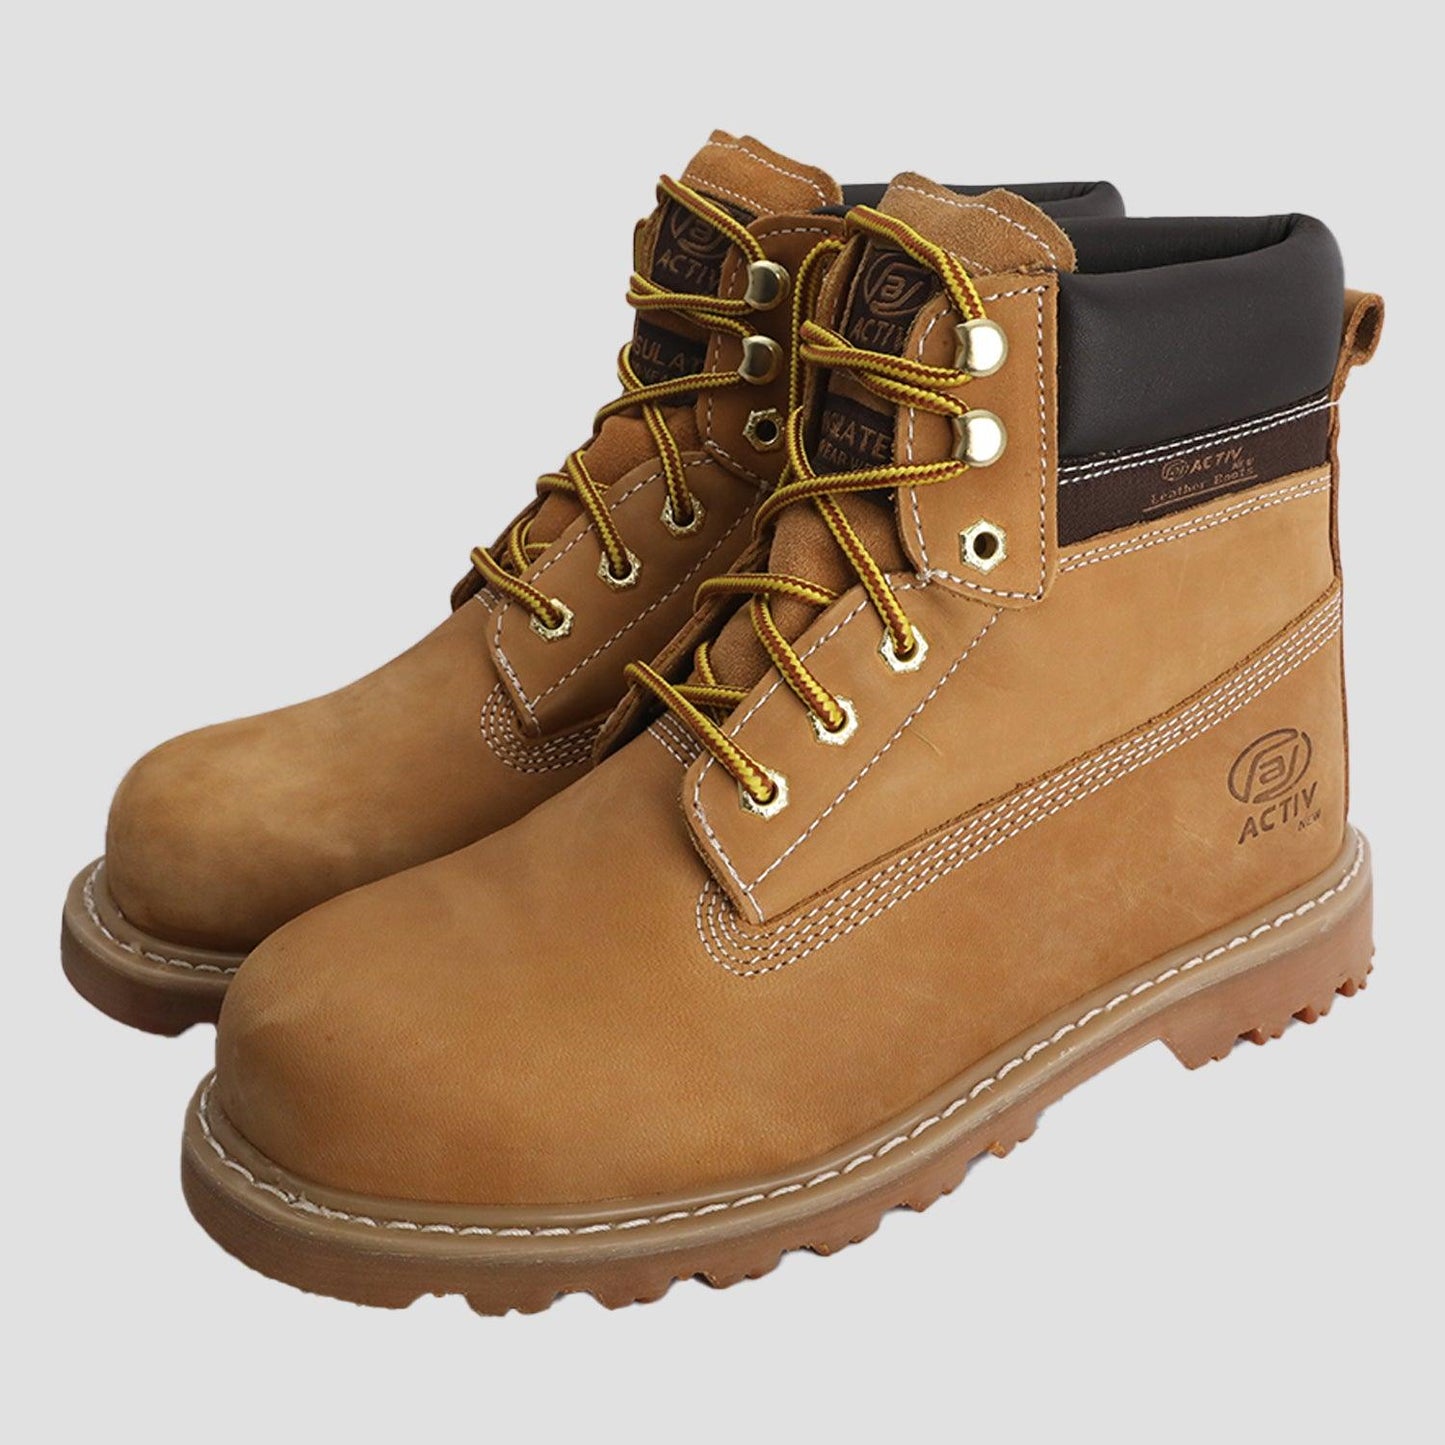 SAFETY BOOT SHOES - BROWN - Activ Abou Alaa